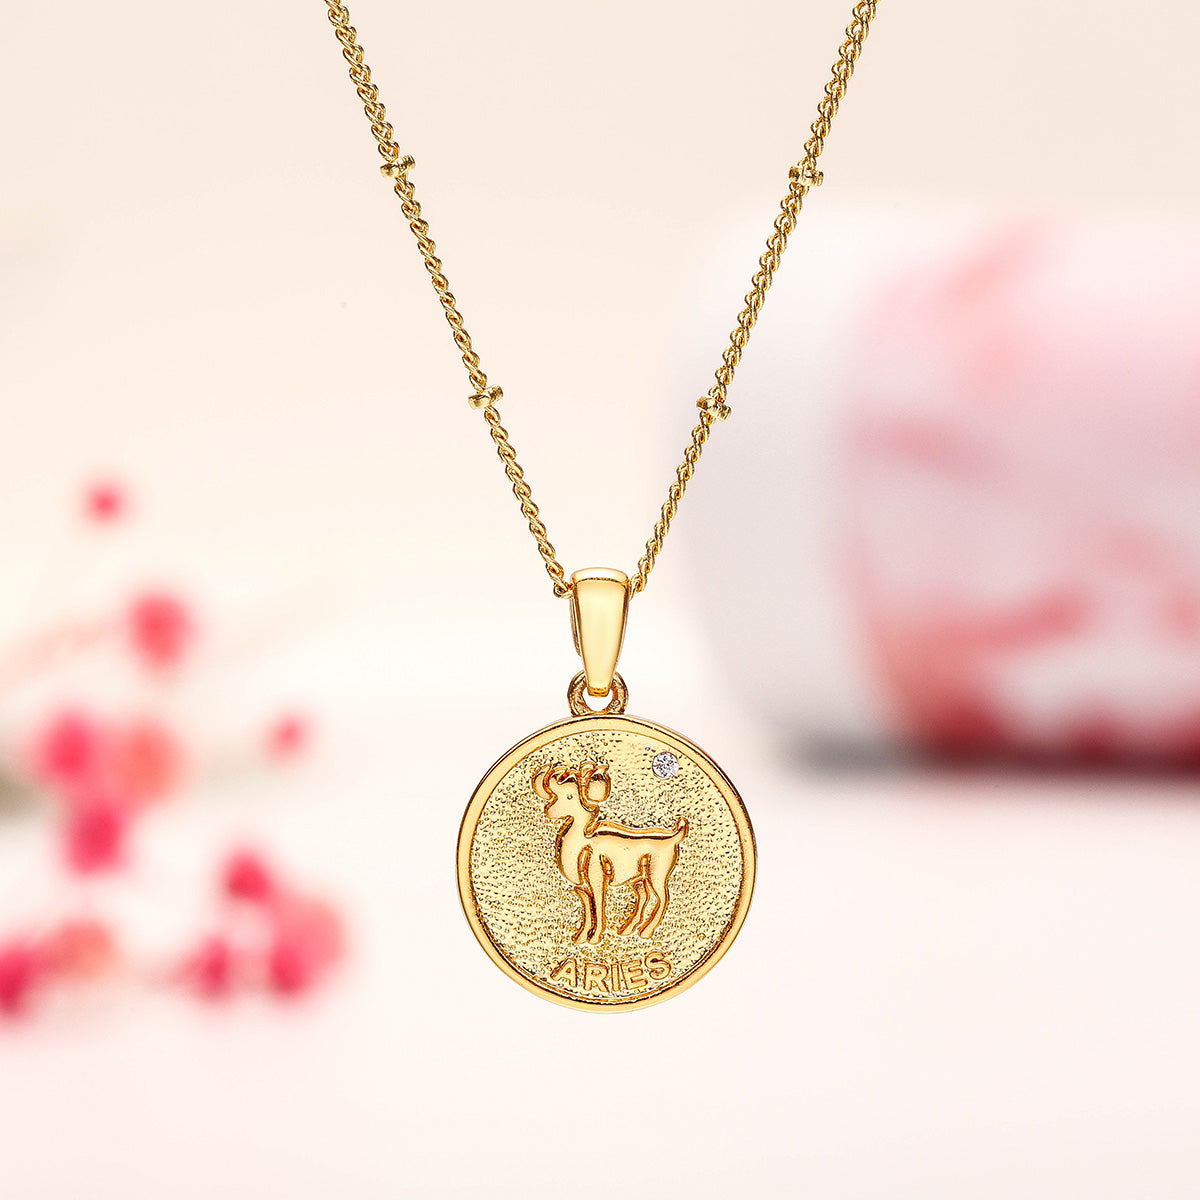 Aries Constellation Coin Pendant Astrology Necklace